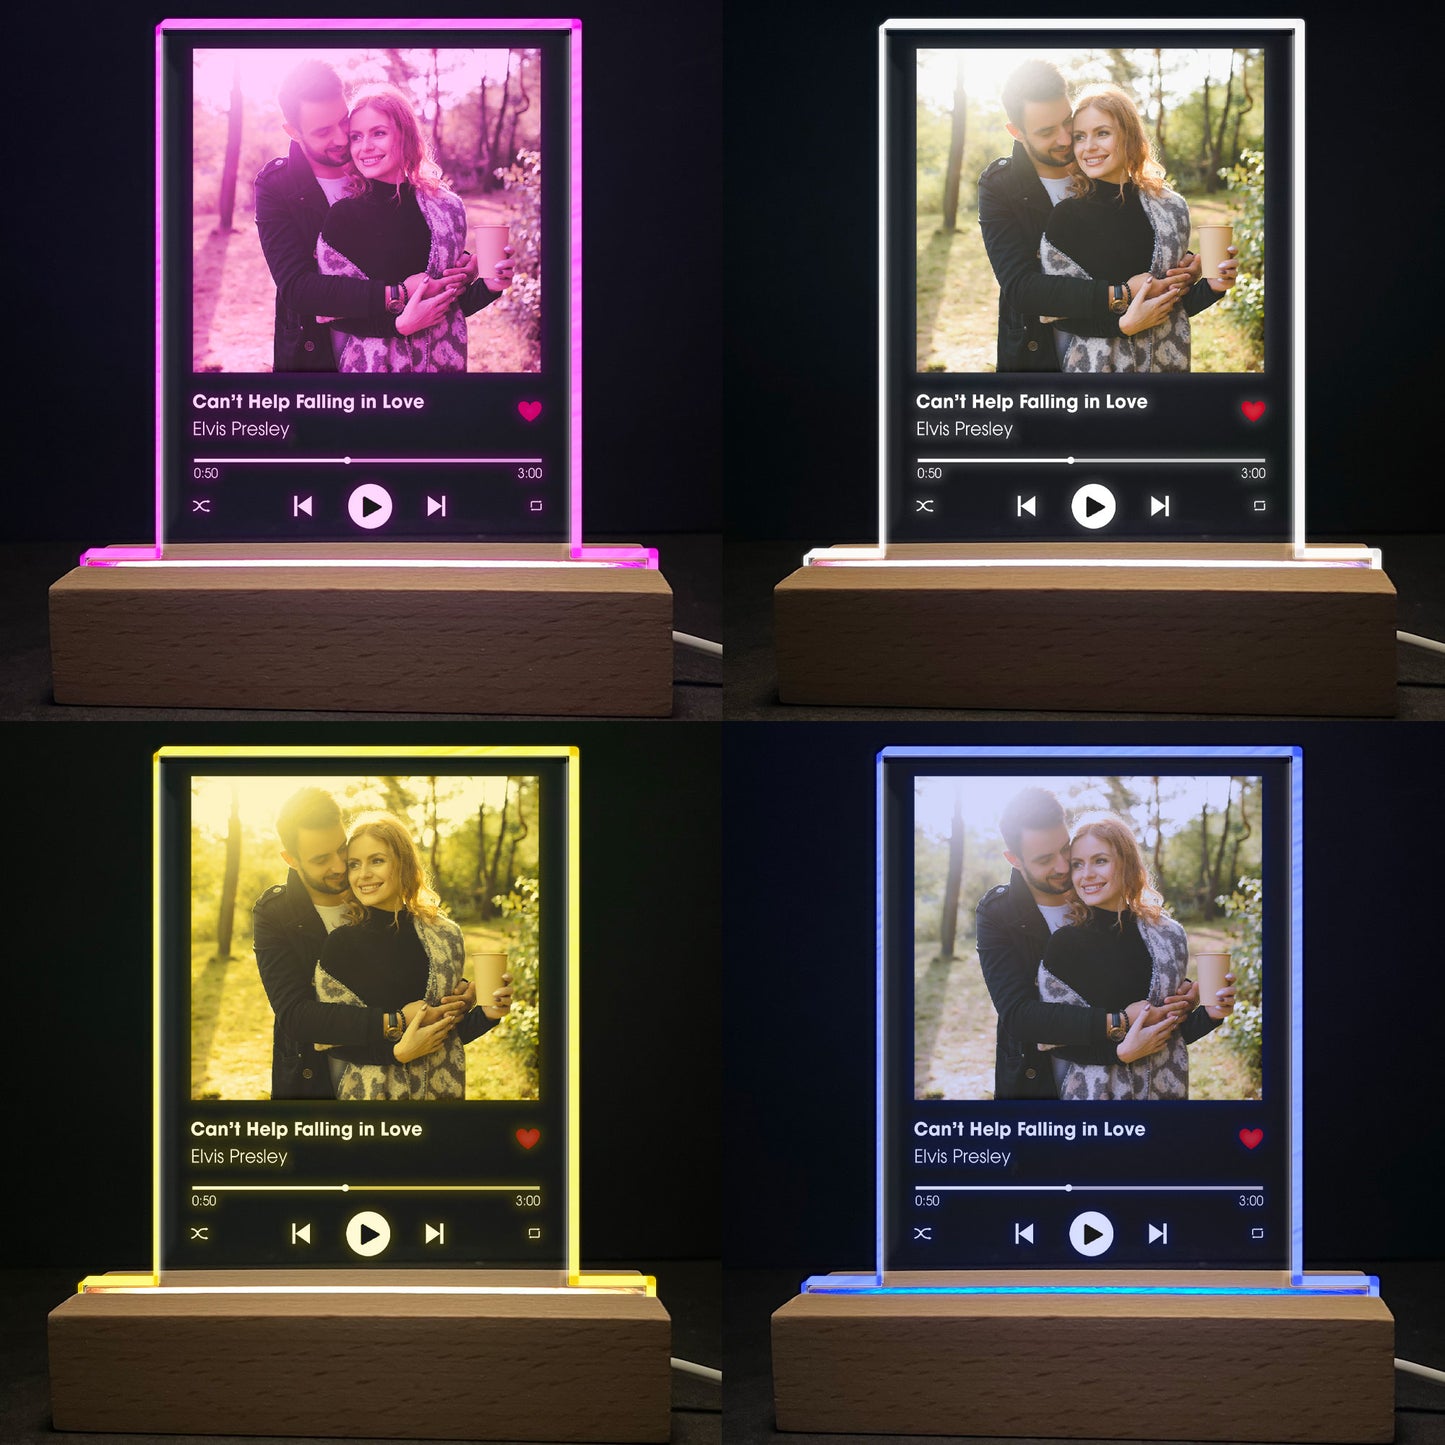 Customized Led Light With Your Favorite Song - Personalized Photo Led Light - Valentine's Day Gifts For Her, Him